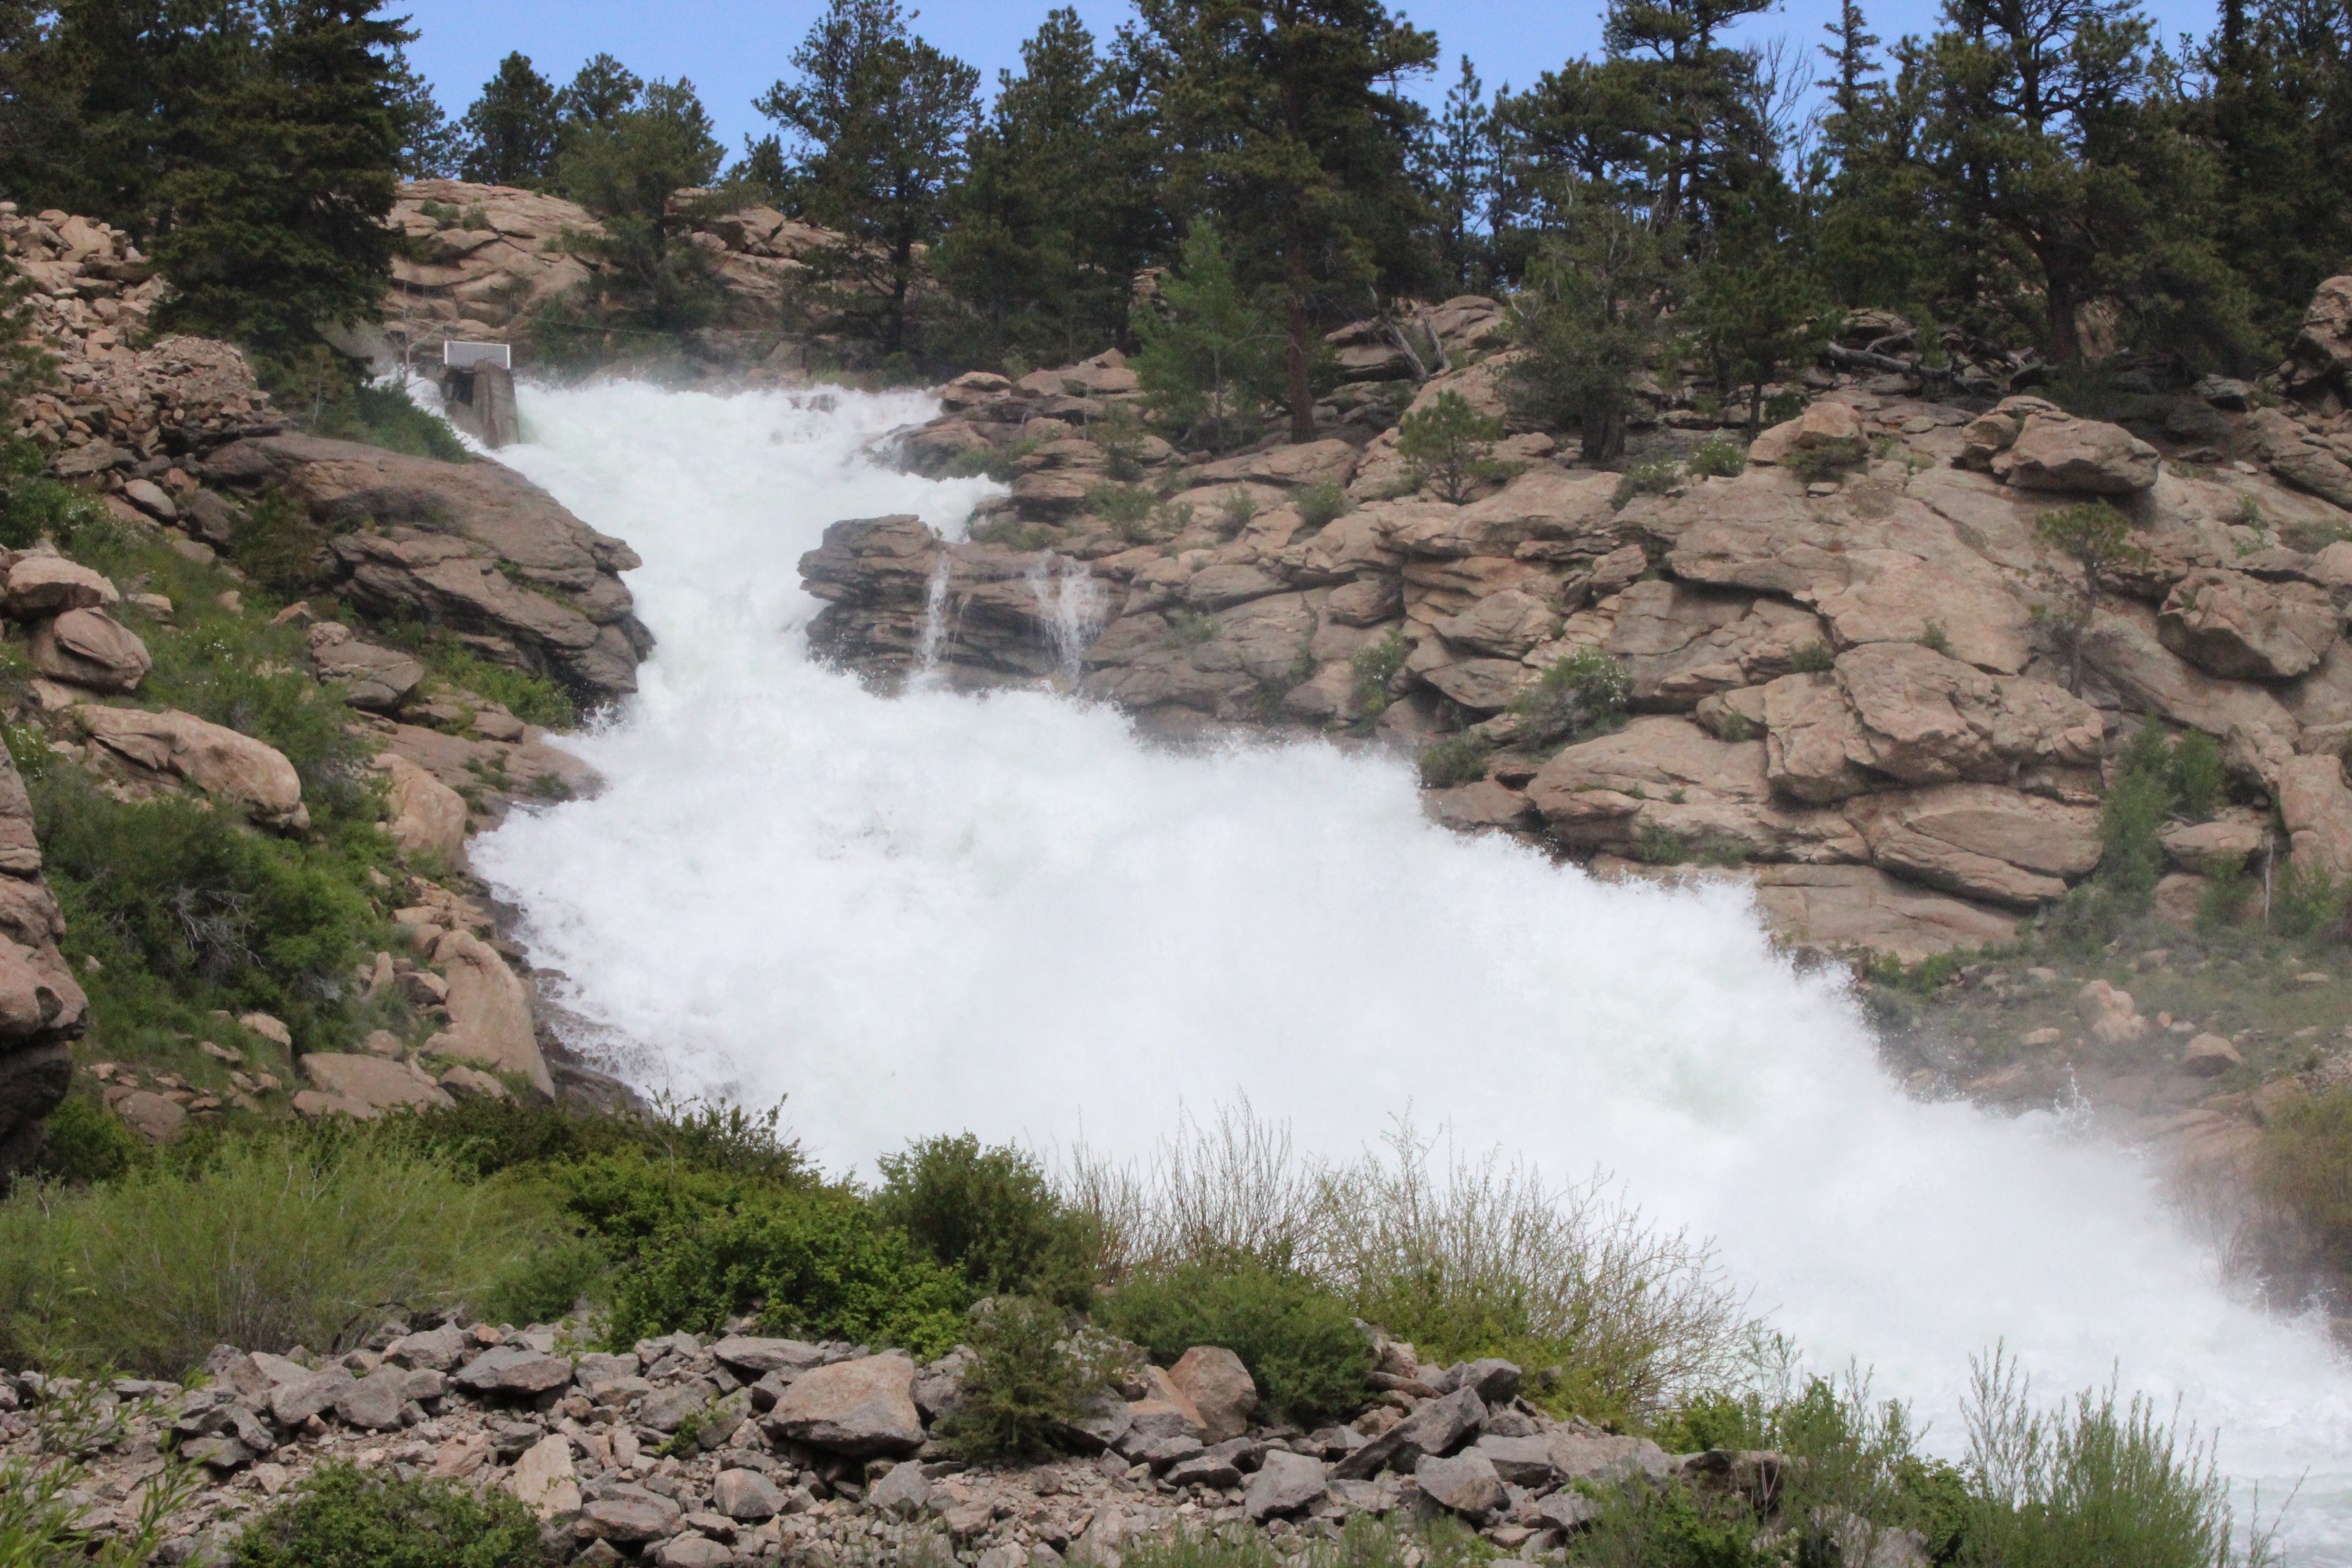 The spillway at Eleven Mile Canyon Reservoir experienced its highest water levels since 1995. 